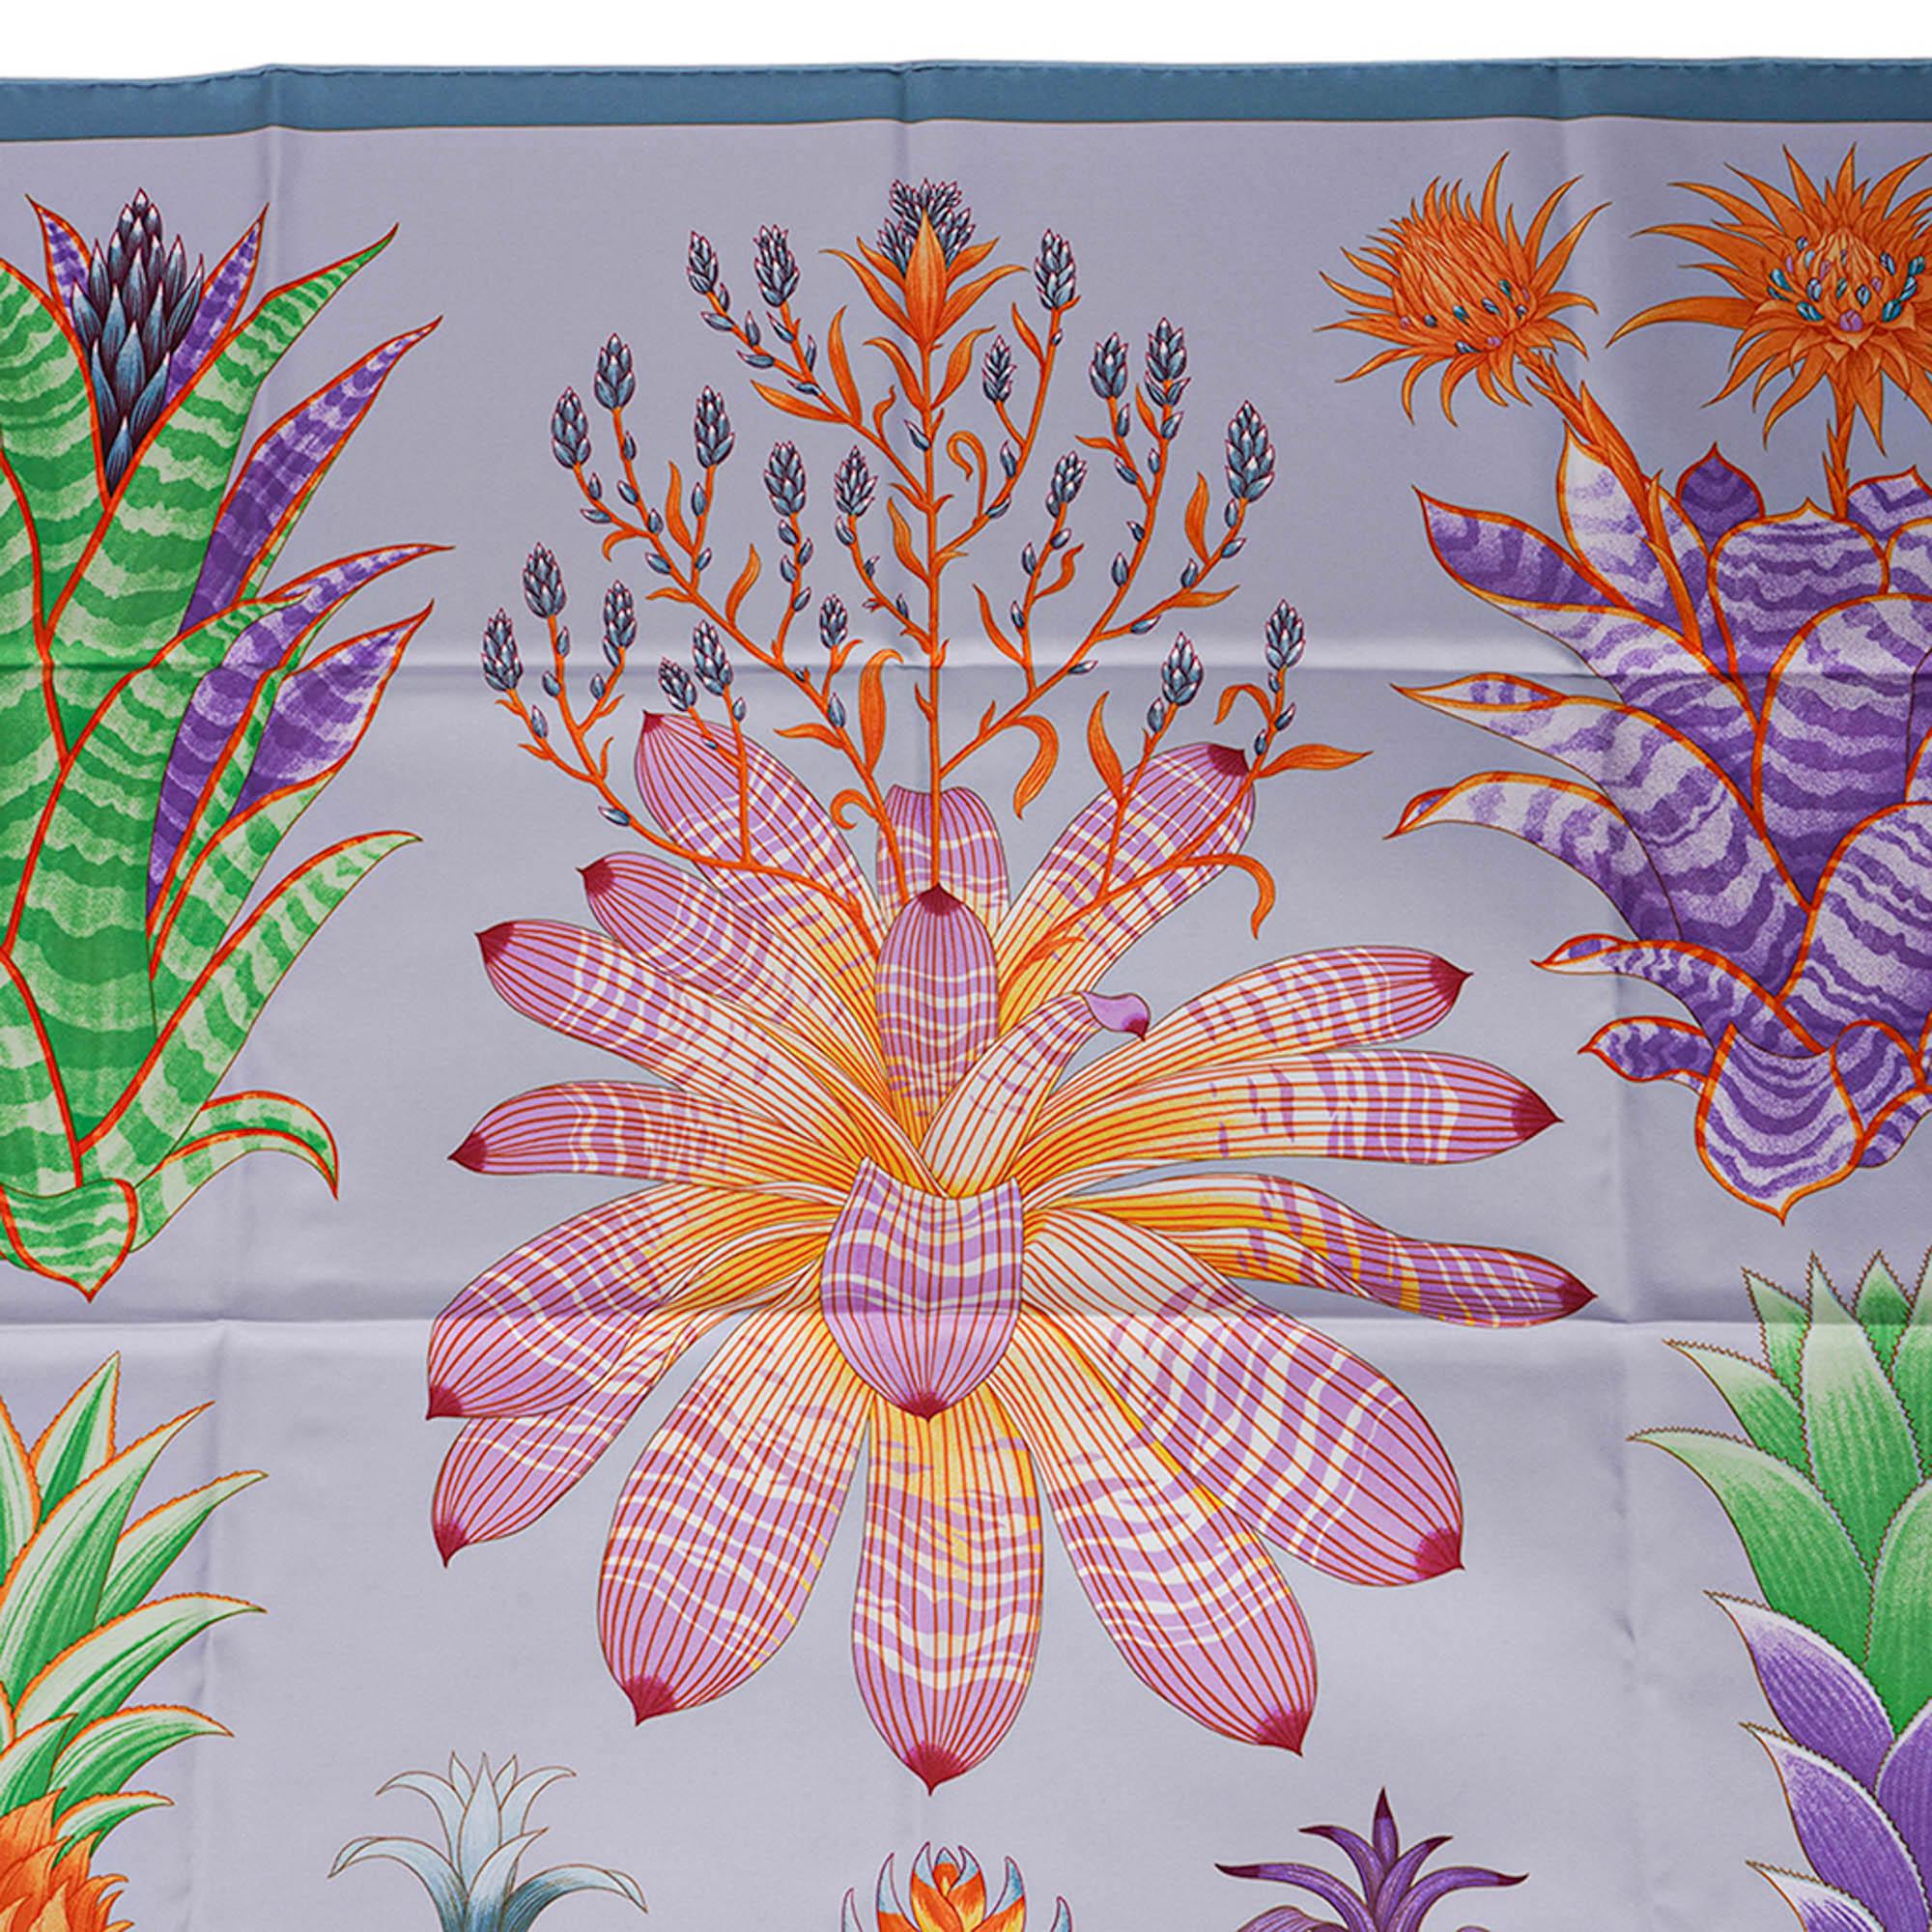 Mightychic offers an Hermes Index Bromeliaceae Silk Twill scarf featured in Bleu Ciel and Violet.
Designed by Katie Scott, the scarf illustrates eight species of bromeliads from the tropical and sub tropical regions of America.
Hand rolled